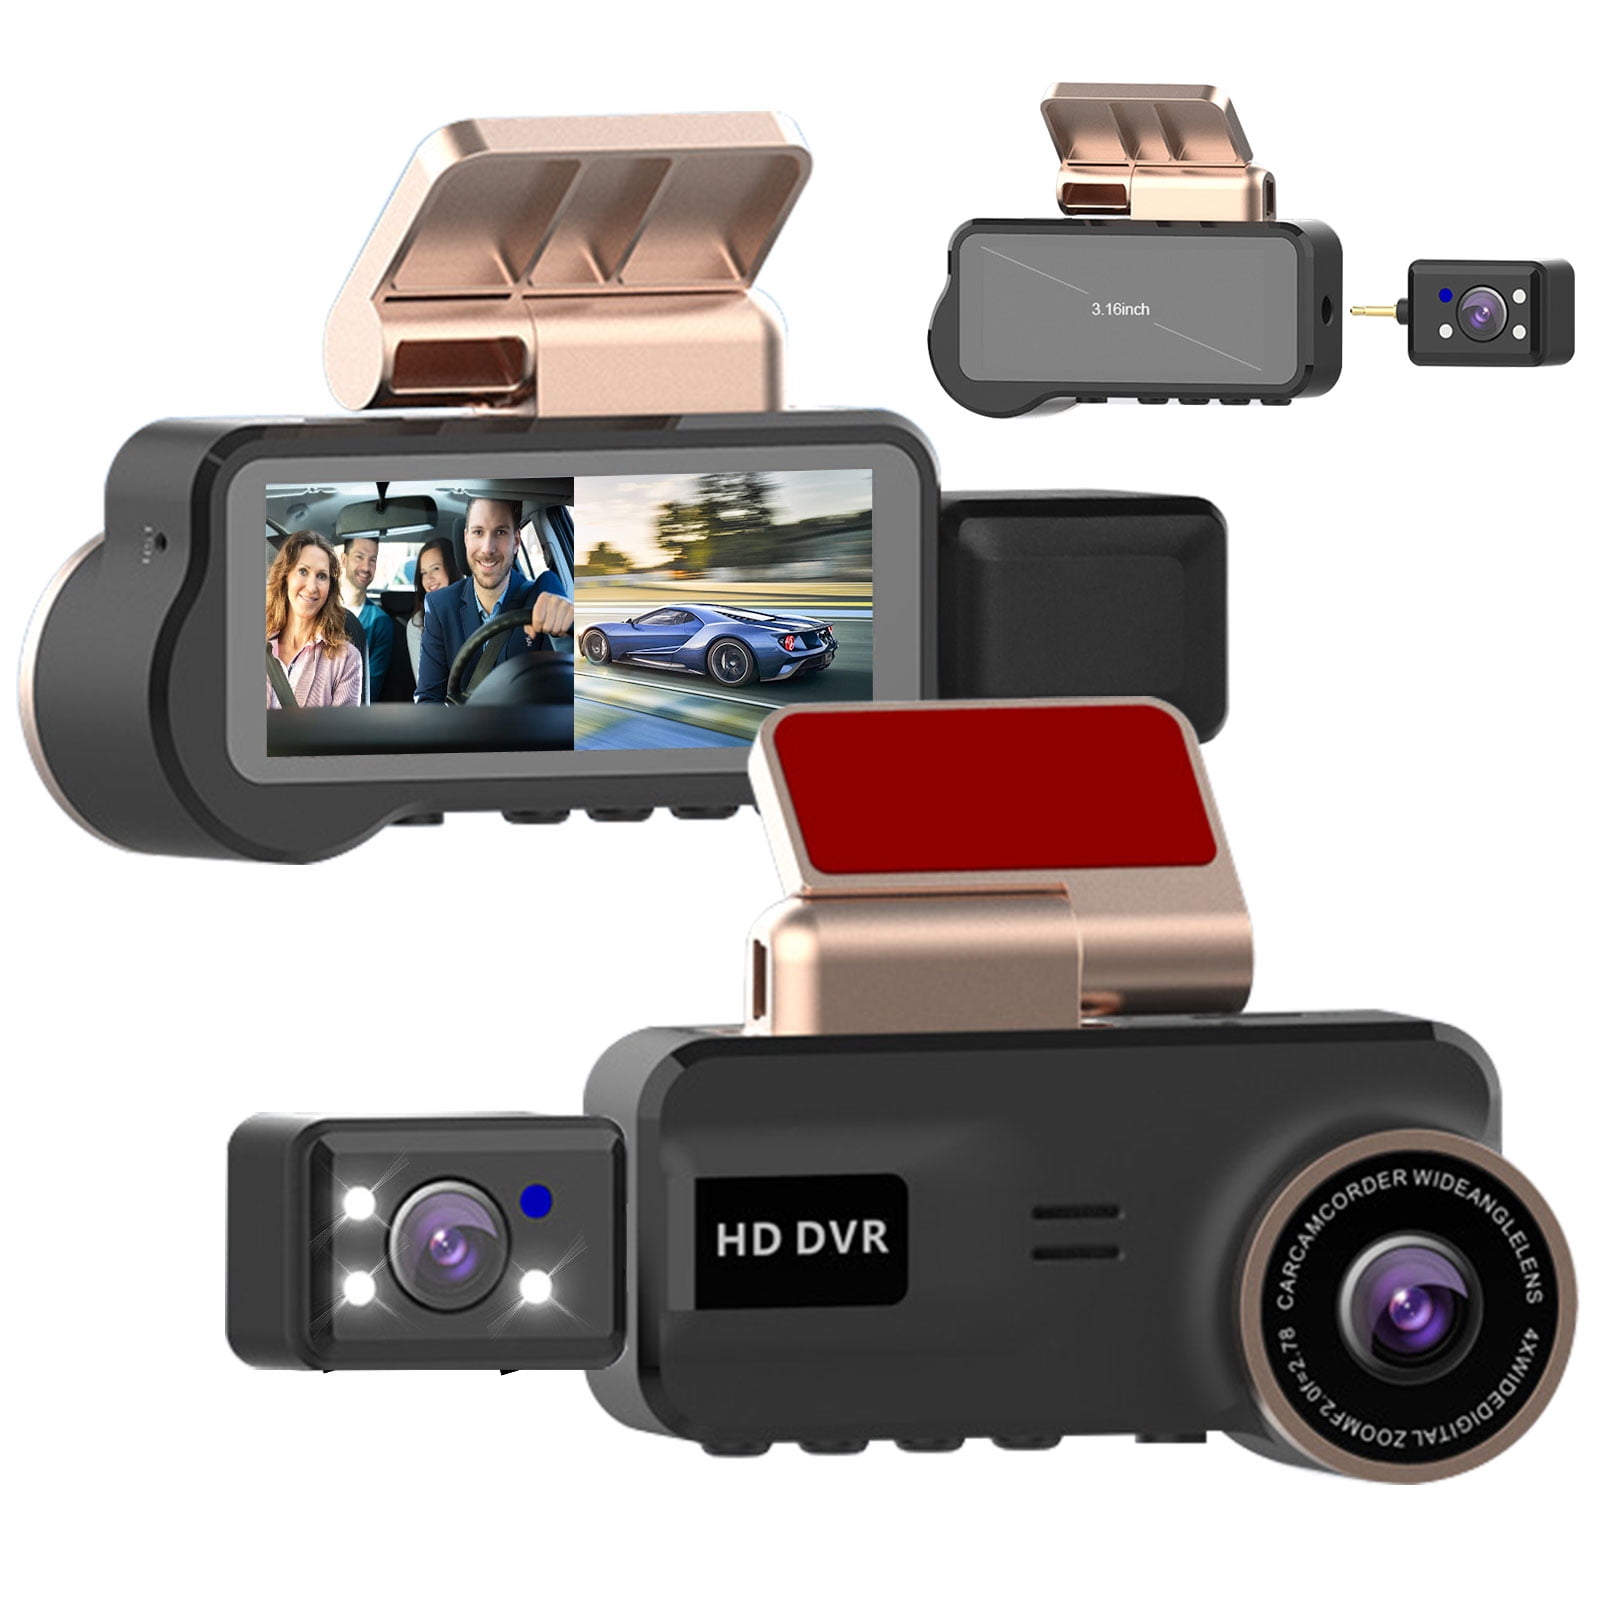 Dual Lens Dash Cam 3.16inch IPS Touch Screen Driving Recorder Front Inside  G-sensor 1080P HD Night Vision Wide Angle Car DVR